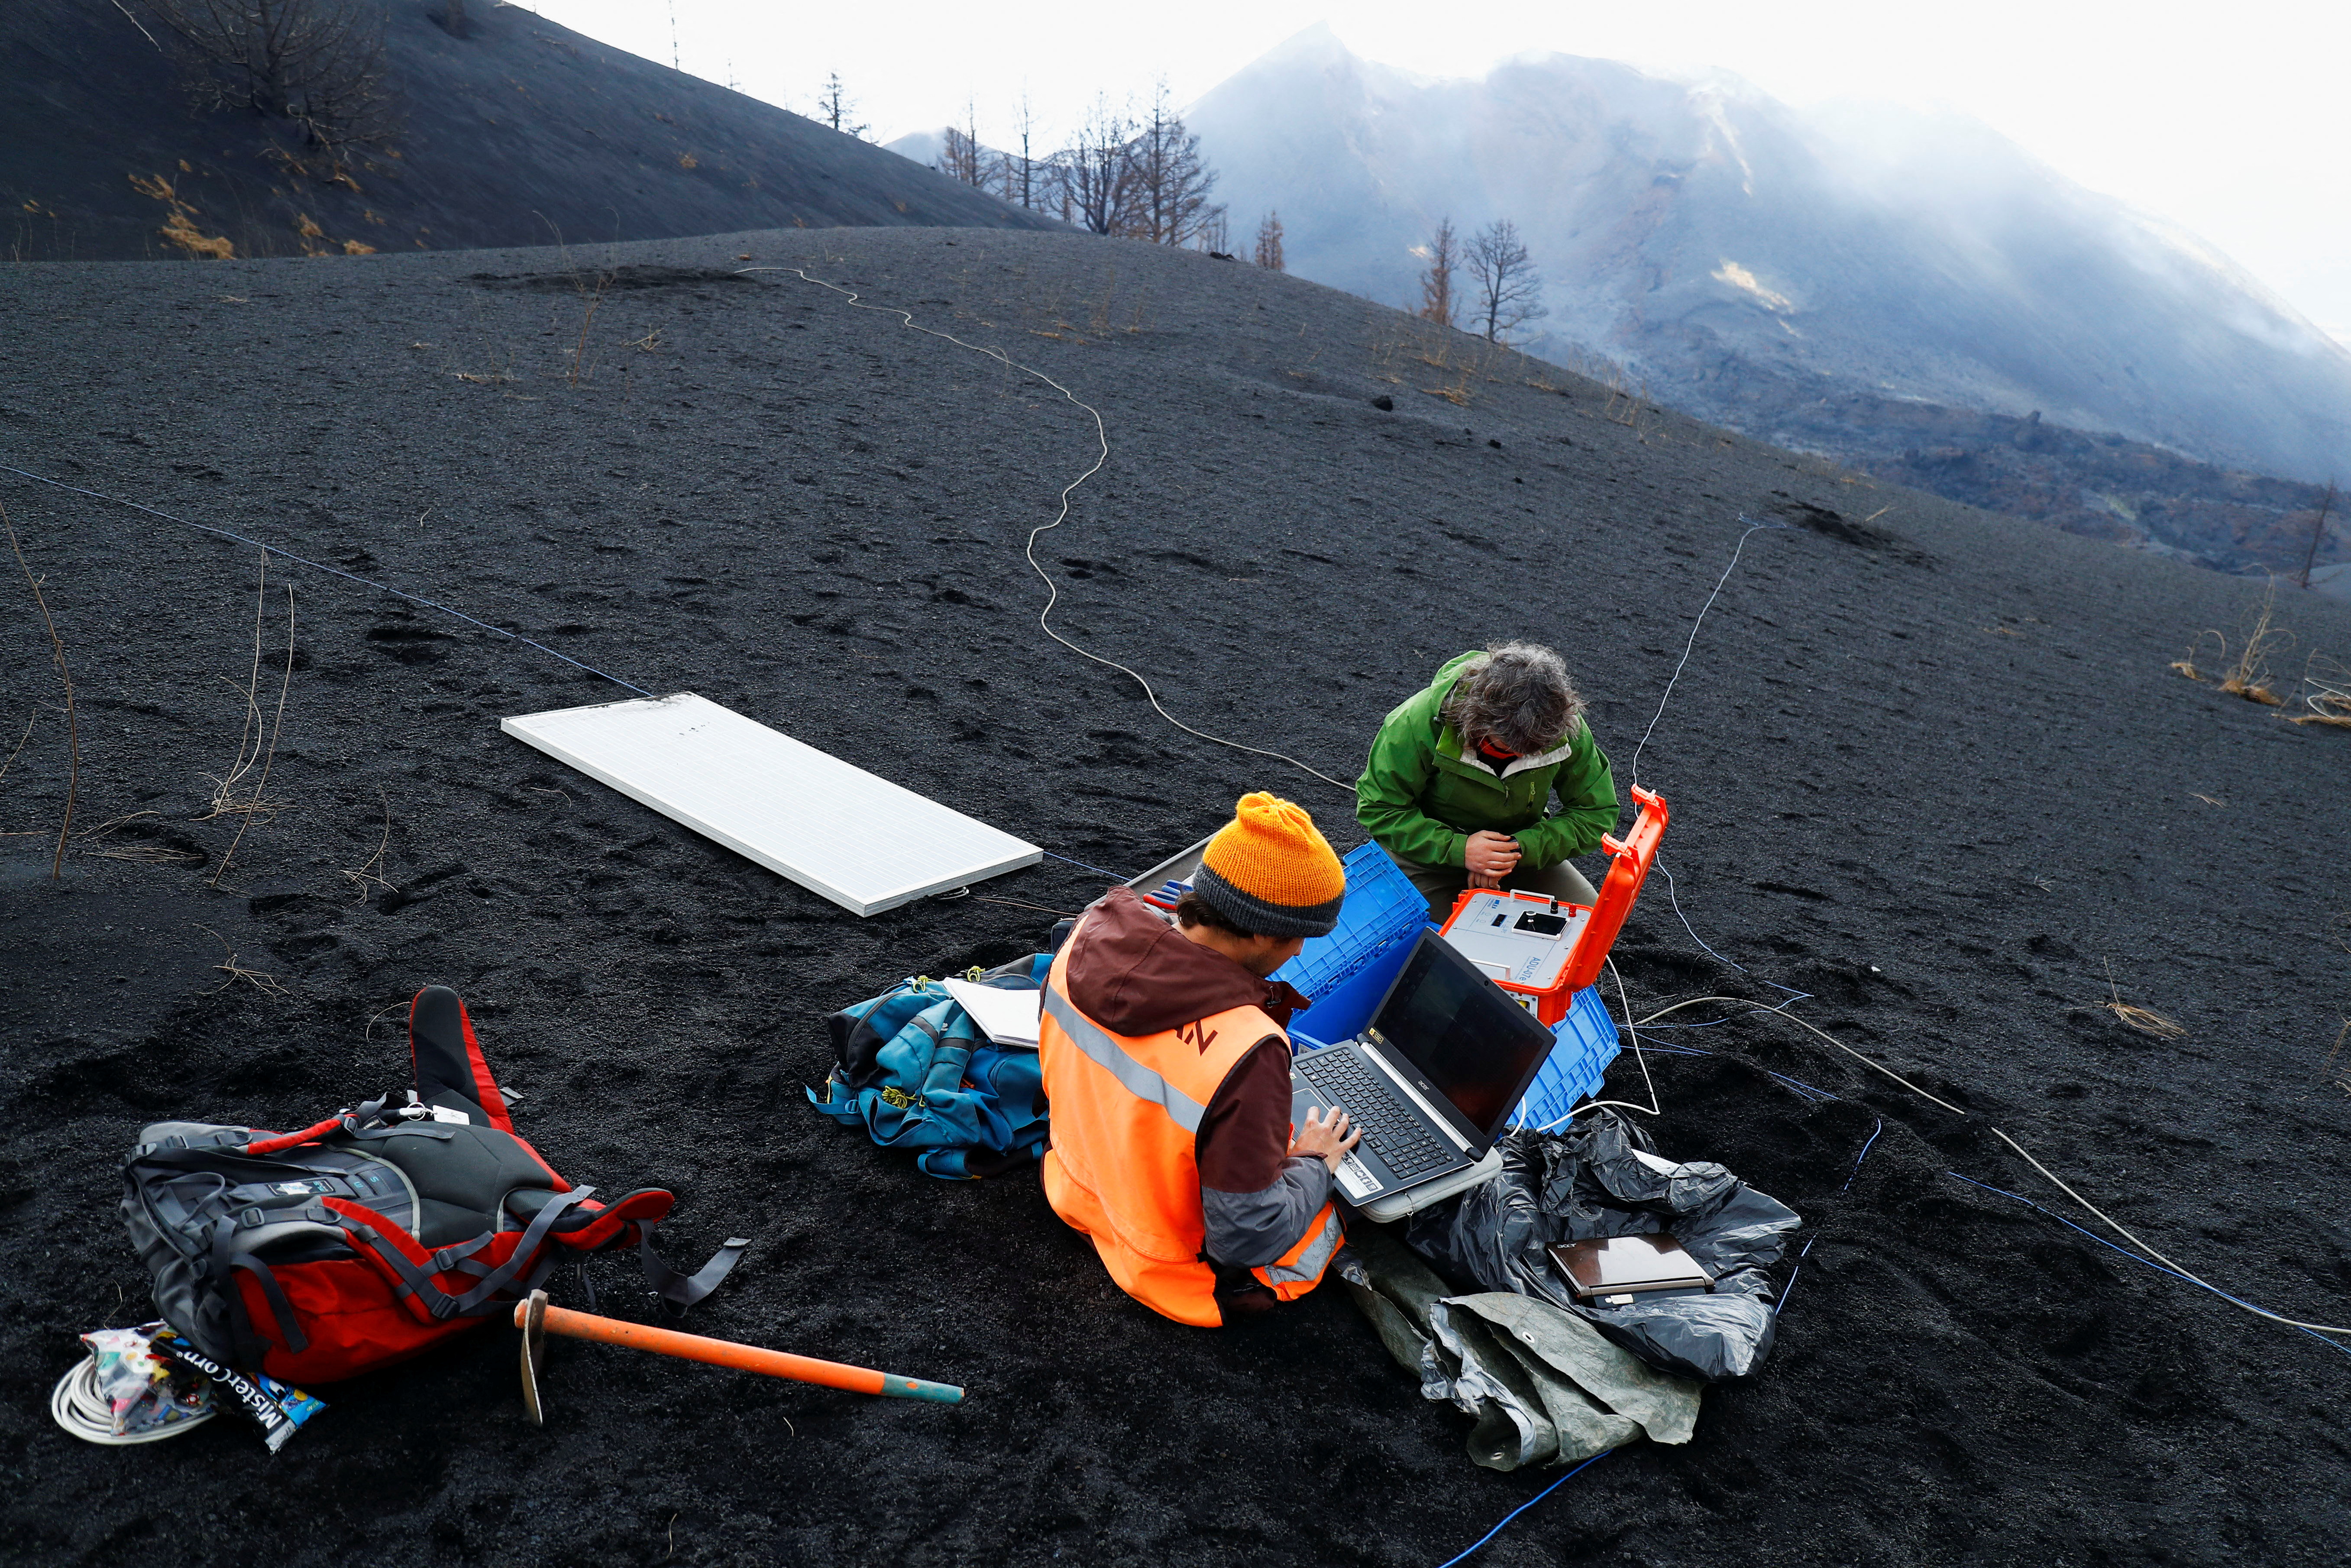 Members of INVOLCAN technical team visit crater of the Cumbre Vieja volcano, in La Palma